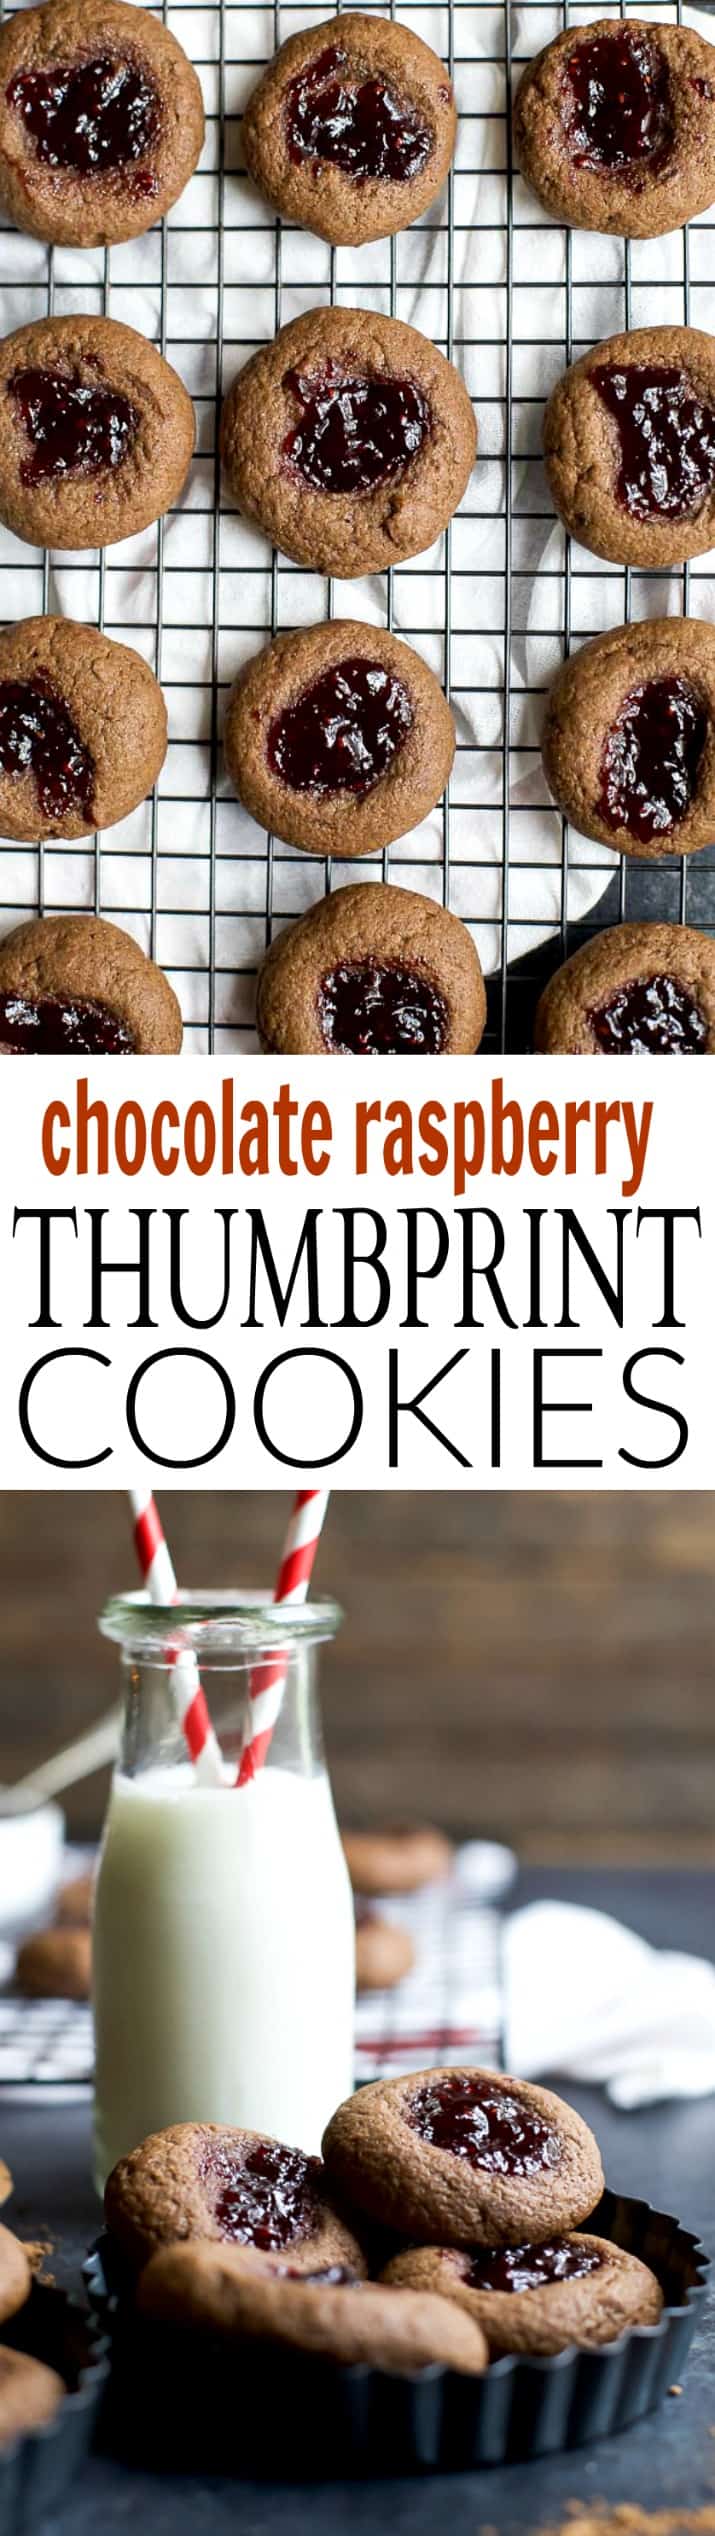 Pinterest collage for Chocolate Raspberry Thumbprint Cookies recipe